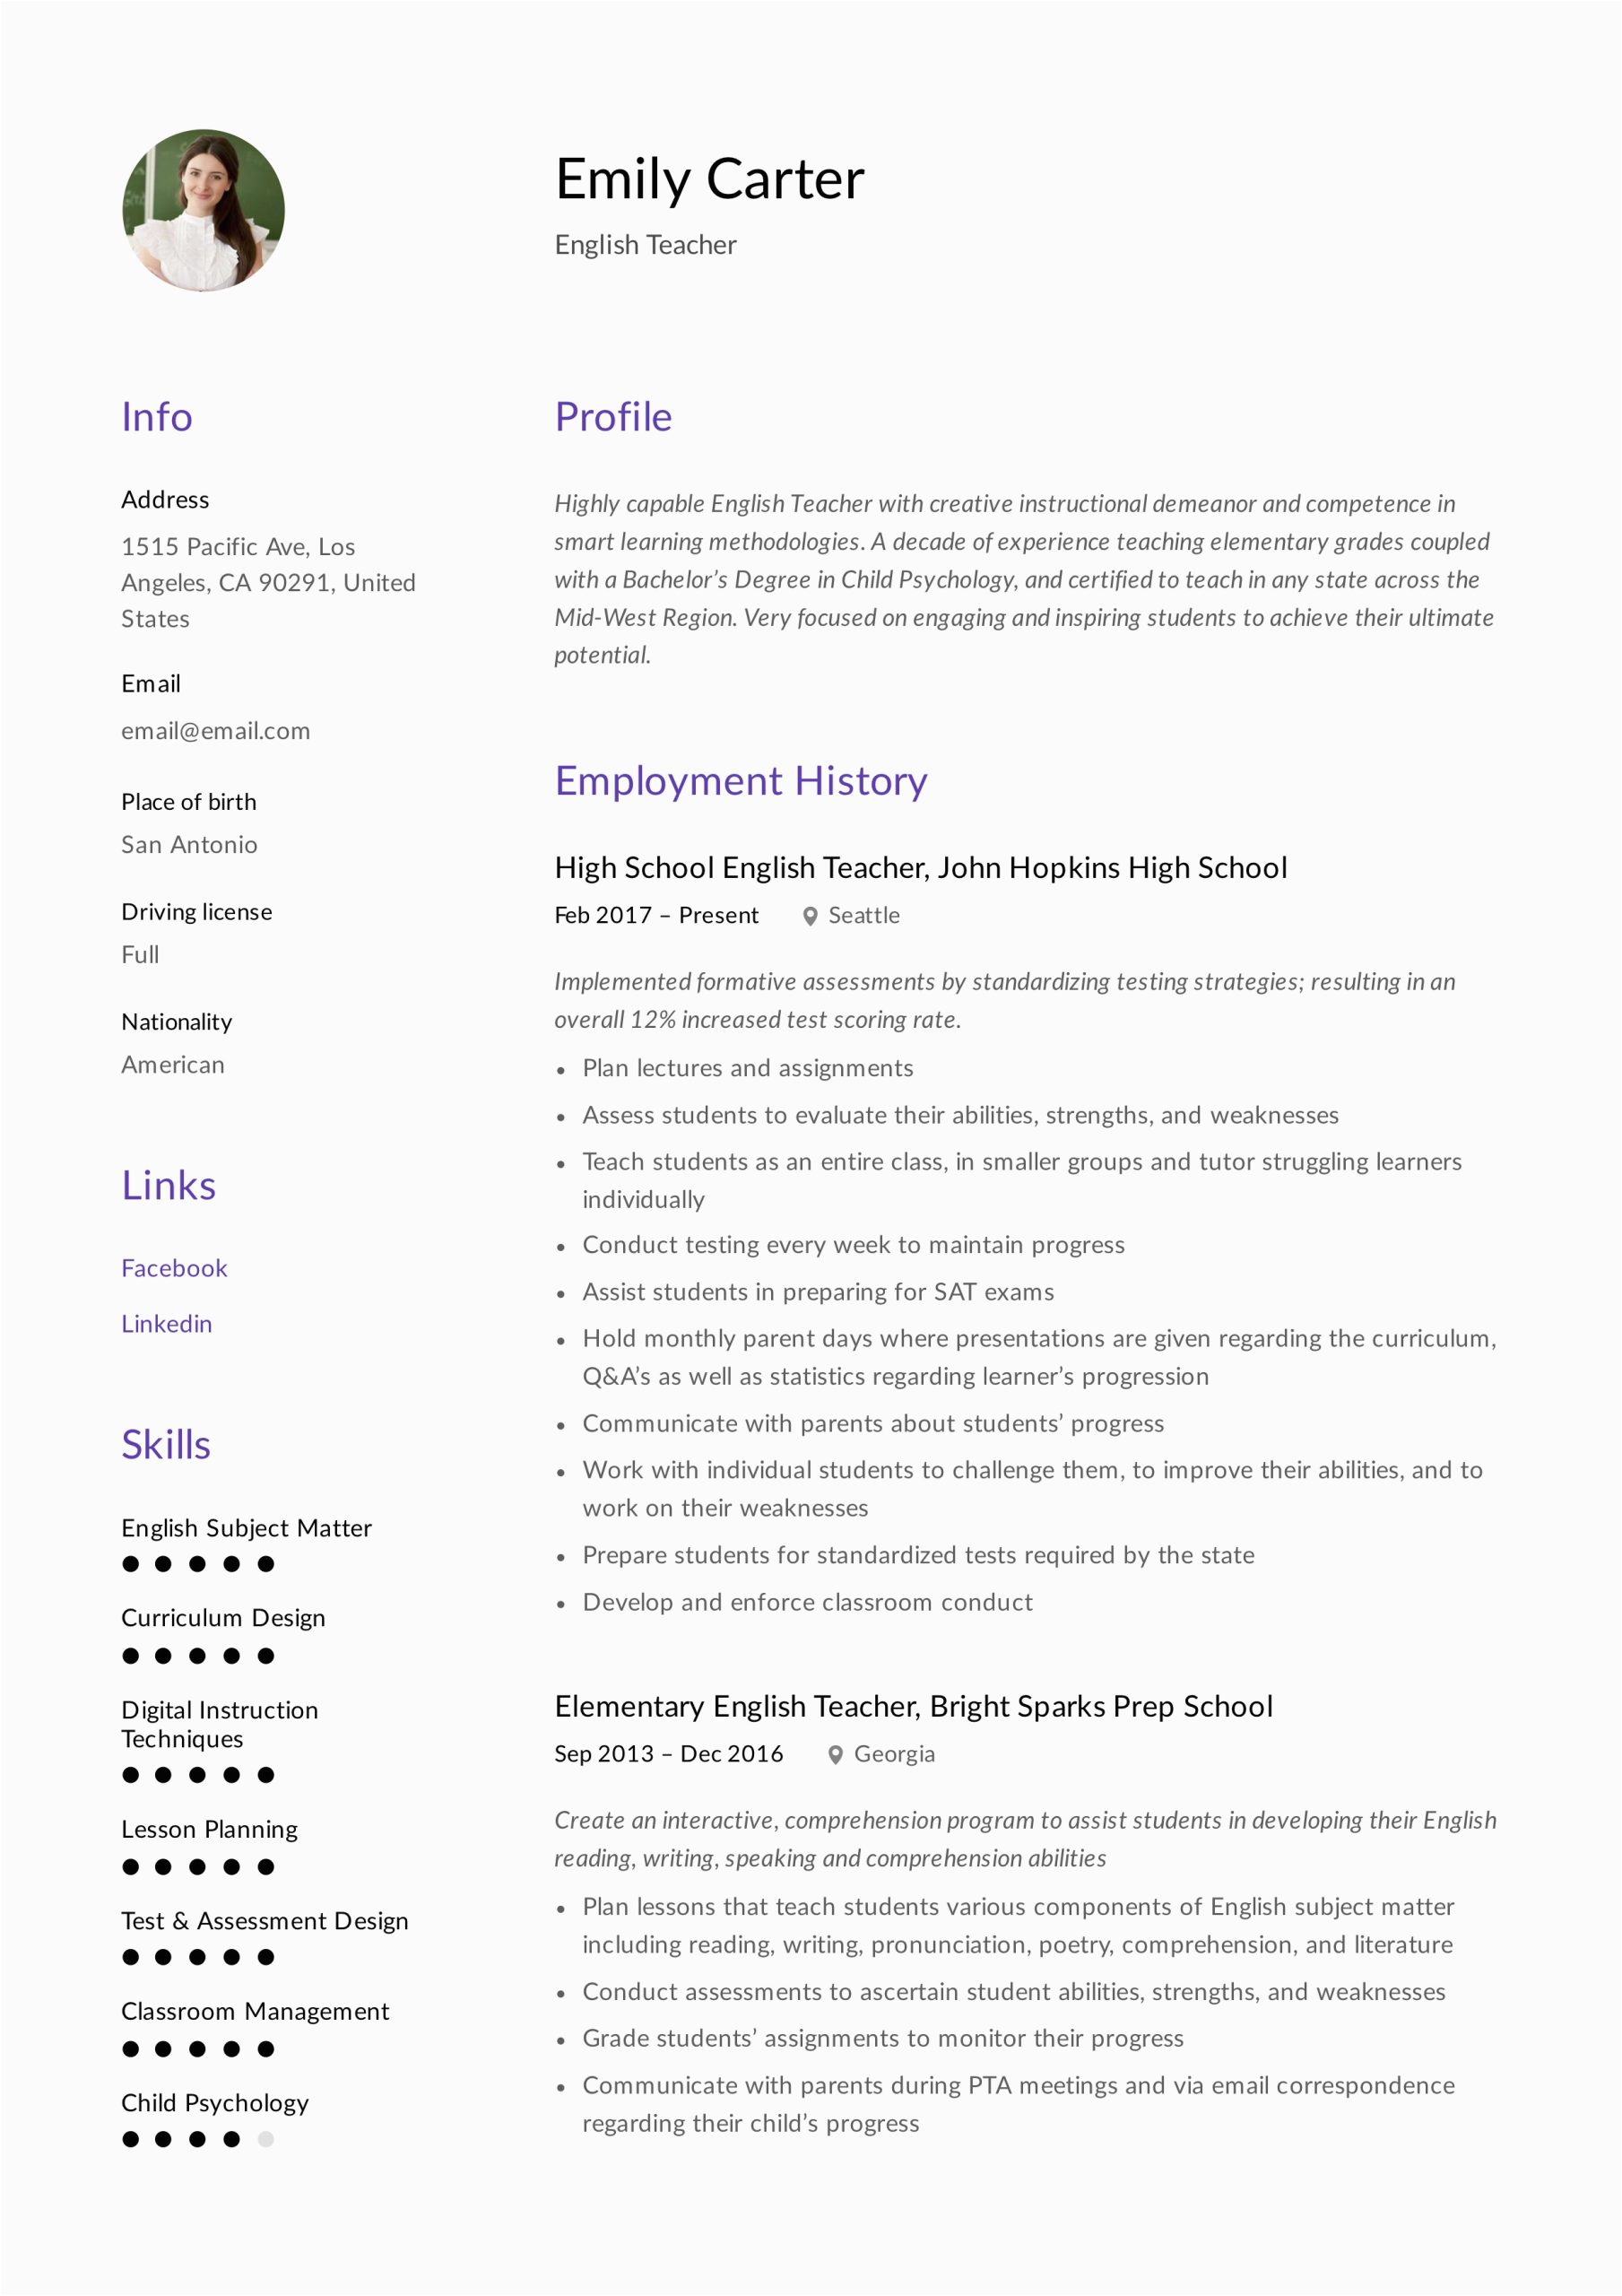 Sample Resume for English Teacher with Experience English Teacher Resume & Writing Guide 12 Free Templates